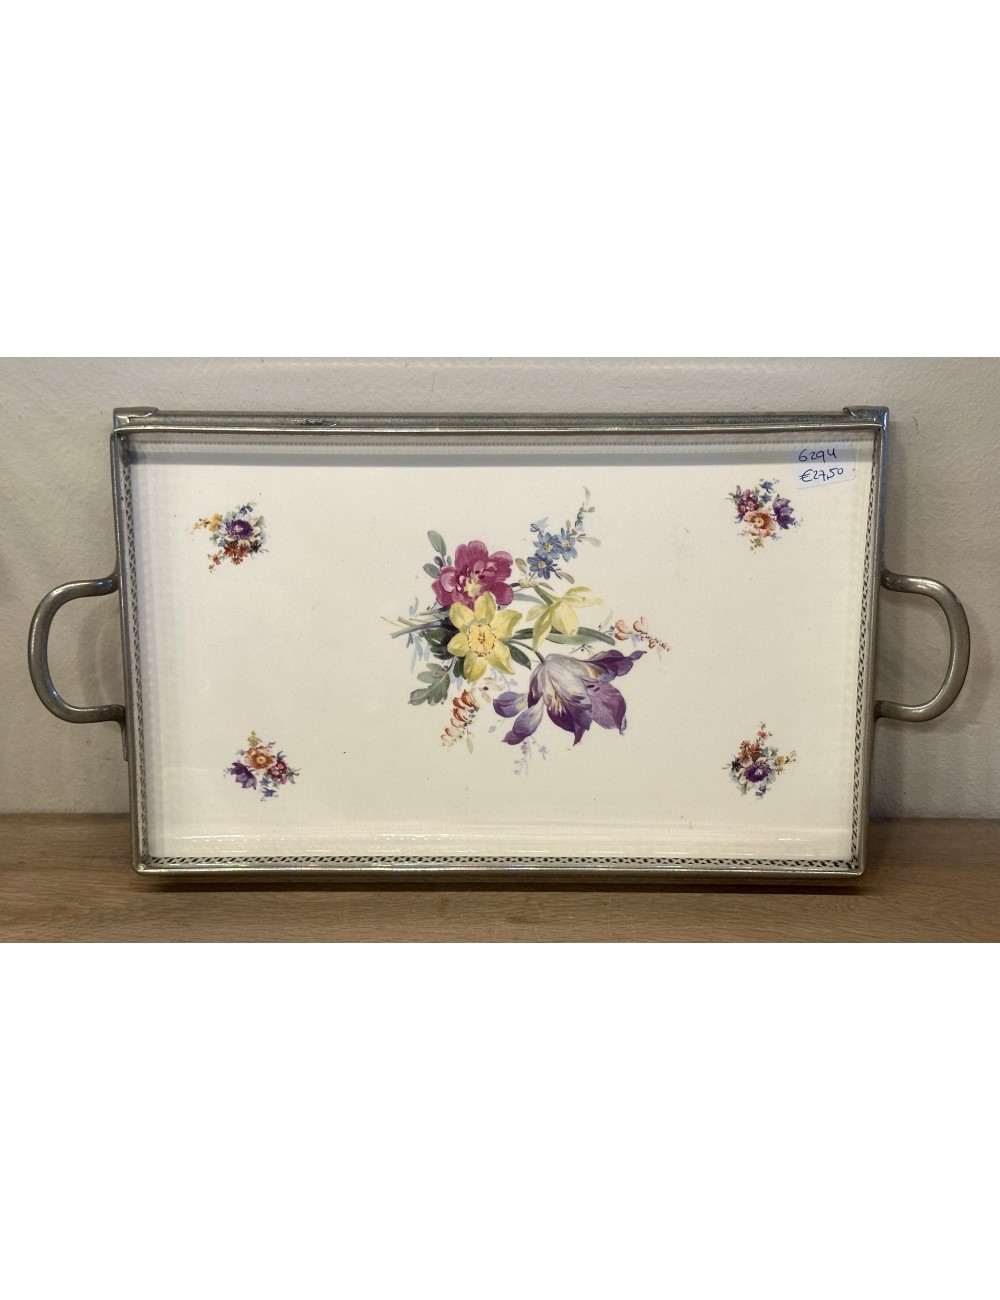 Tray in metal frame with handles (one loose) - décor with purple/pink and yellow flowers